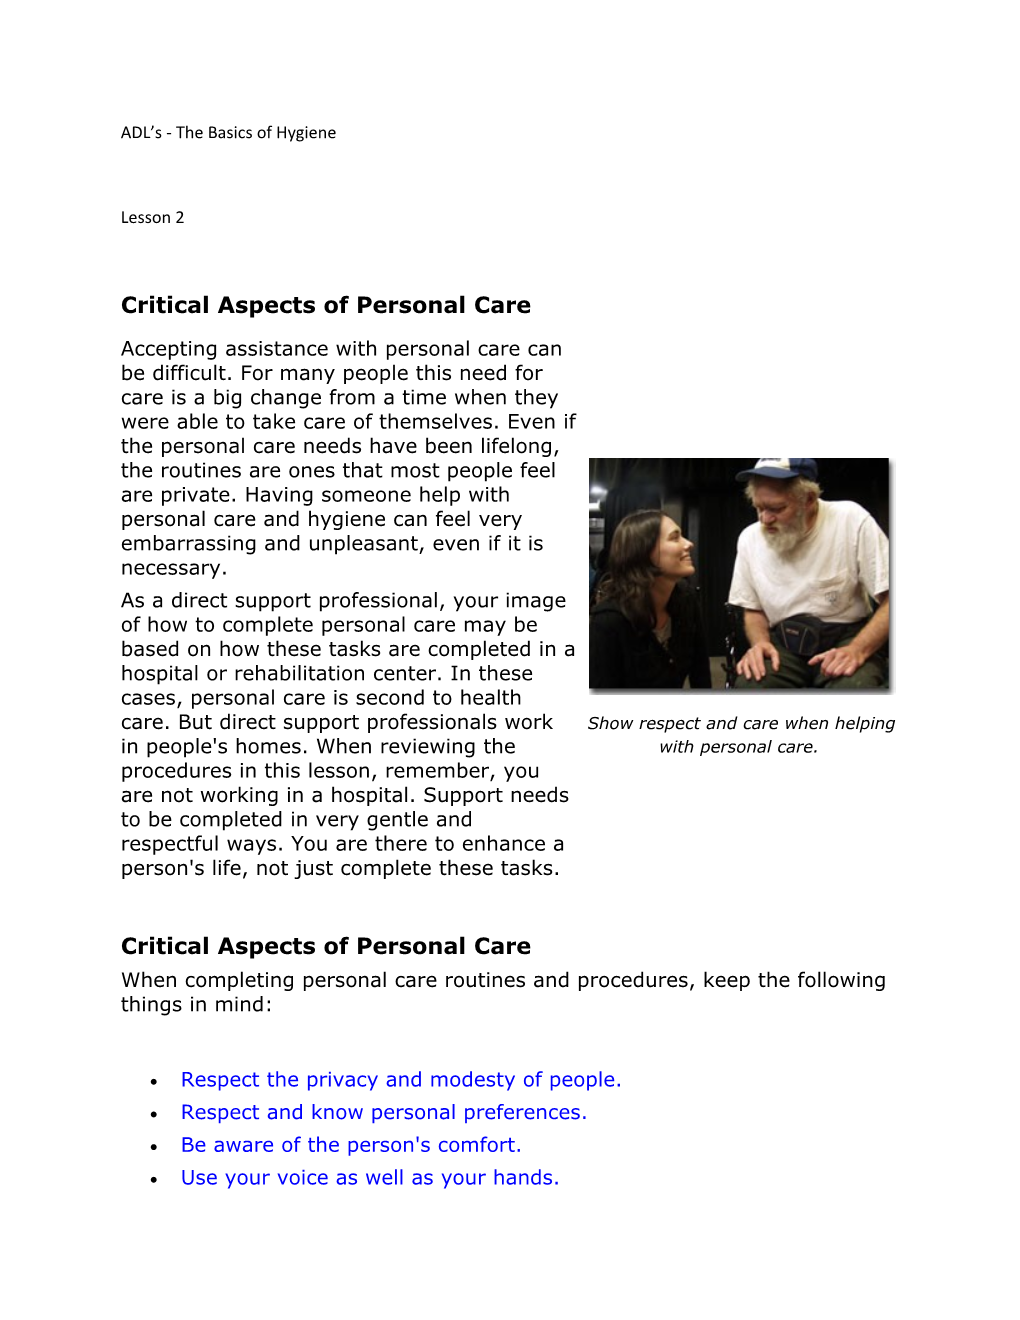 Critical Aspects of Personal Care